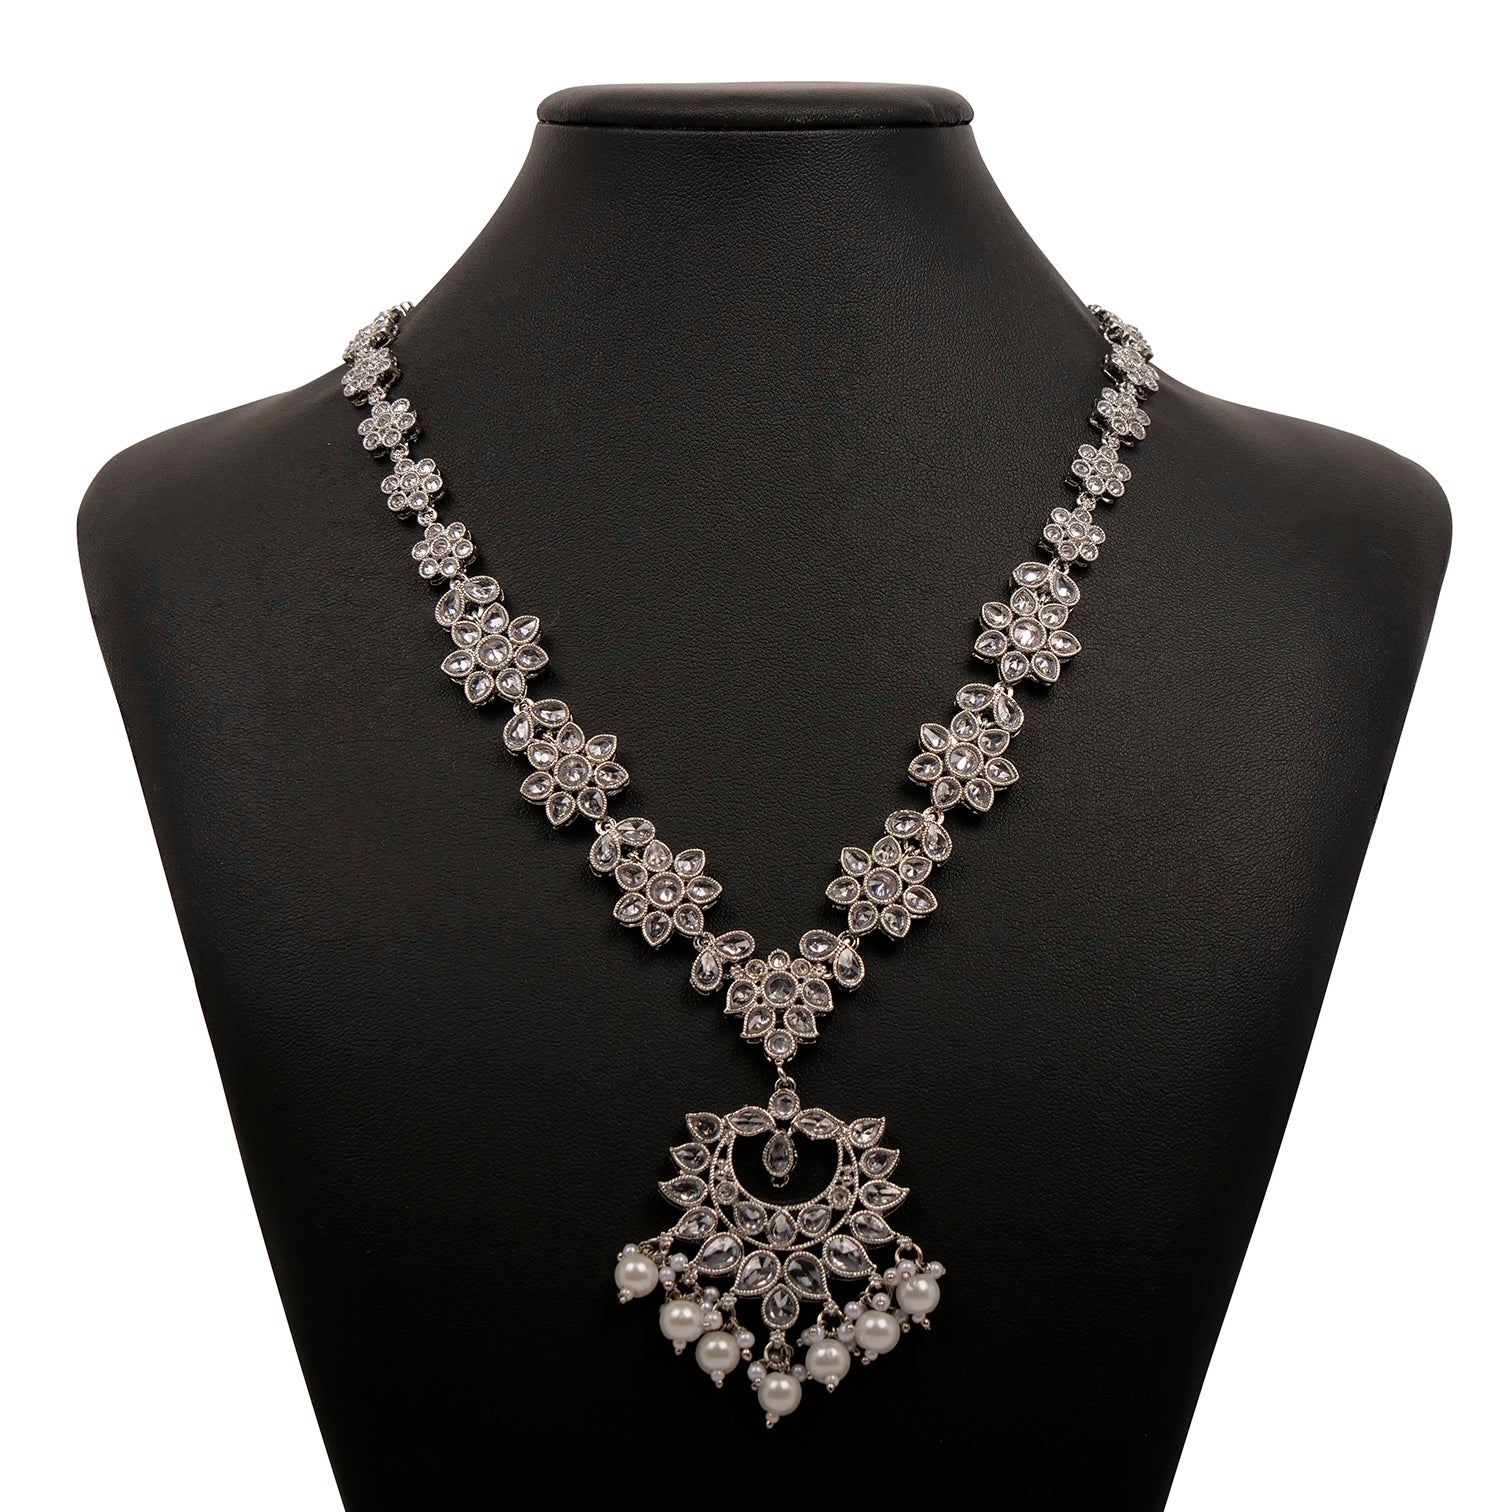 Niara Long Necklace in Pearl and Rhodium